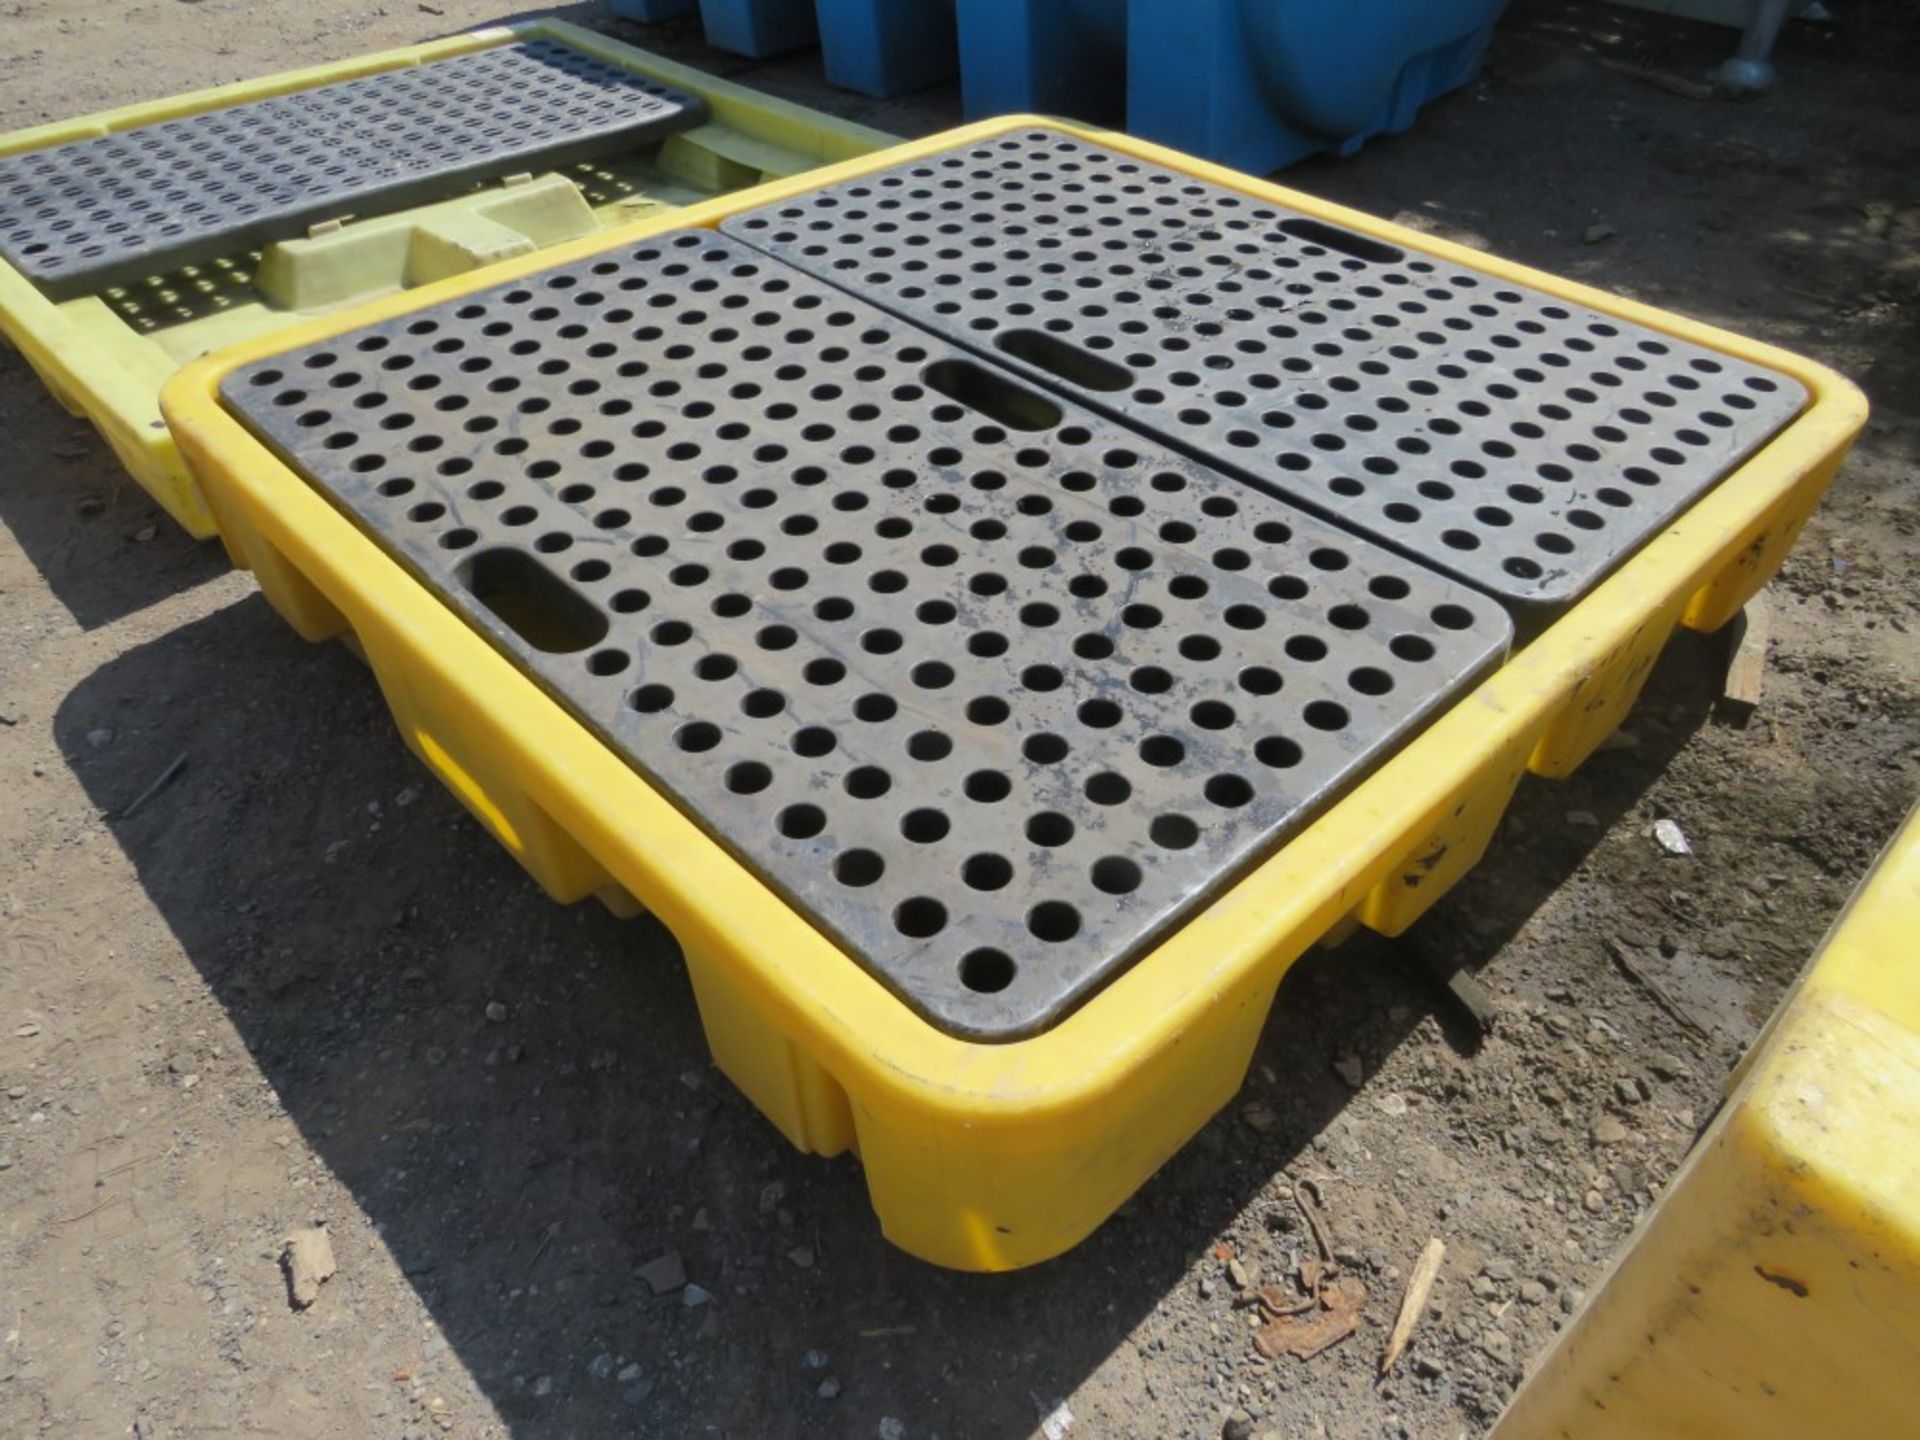 YELLOW 4' X 4' X 1' OIL DRUM SPILL CONTAINER [+ VAT]